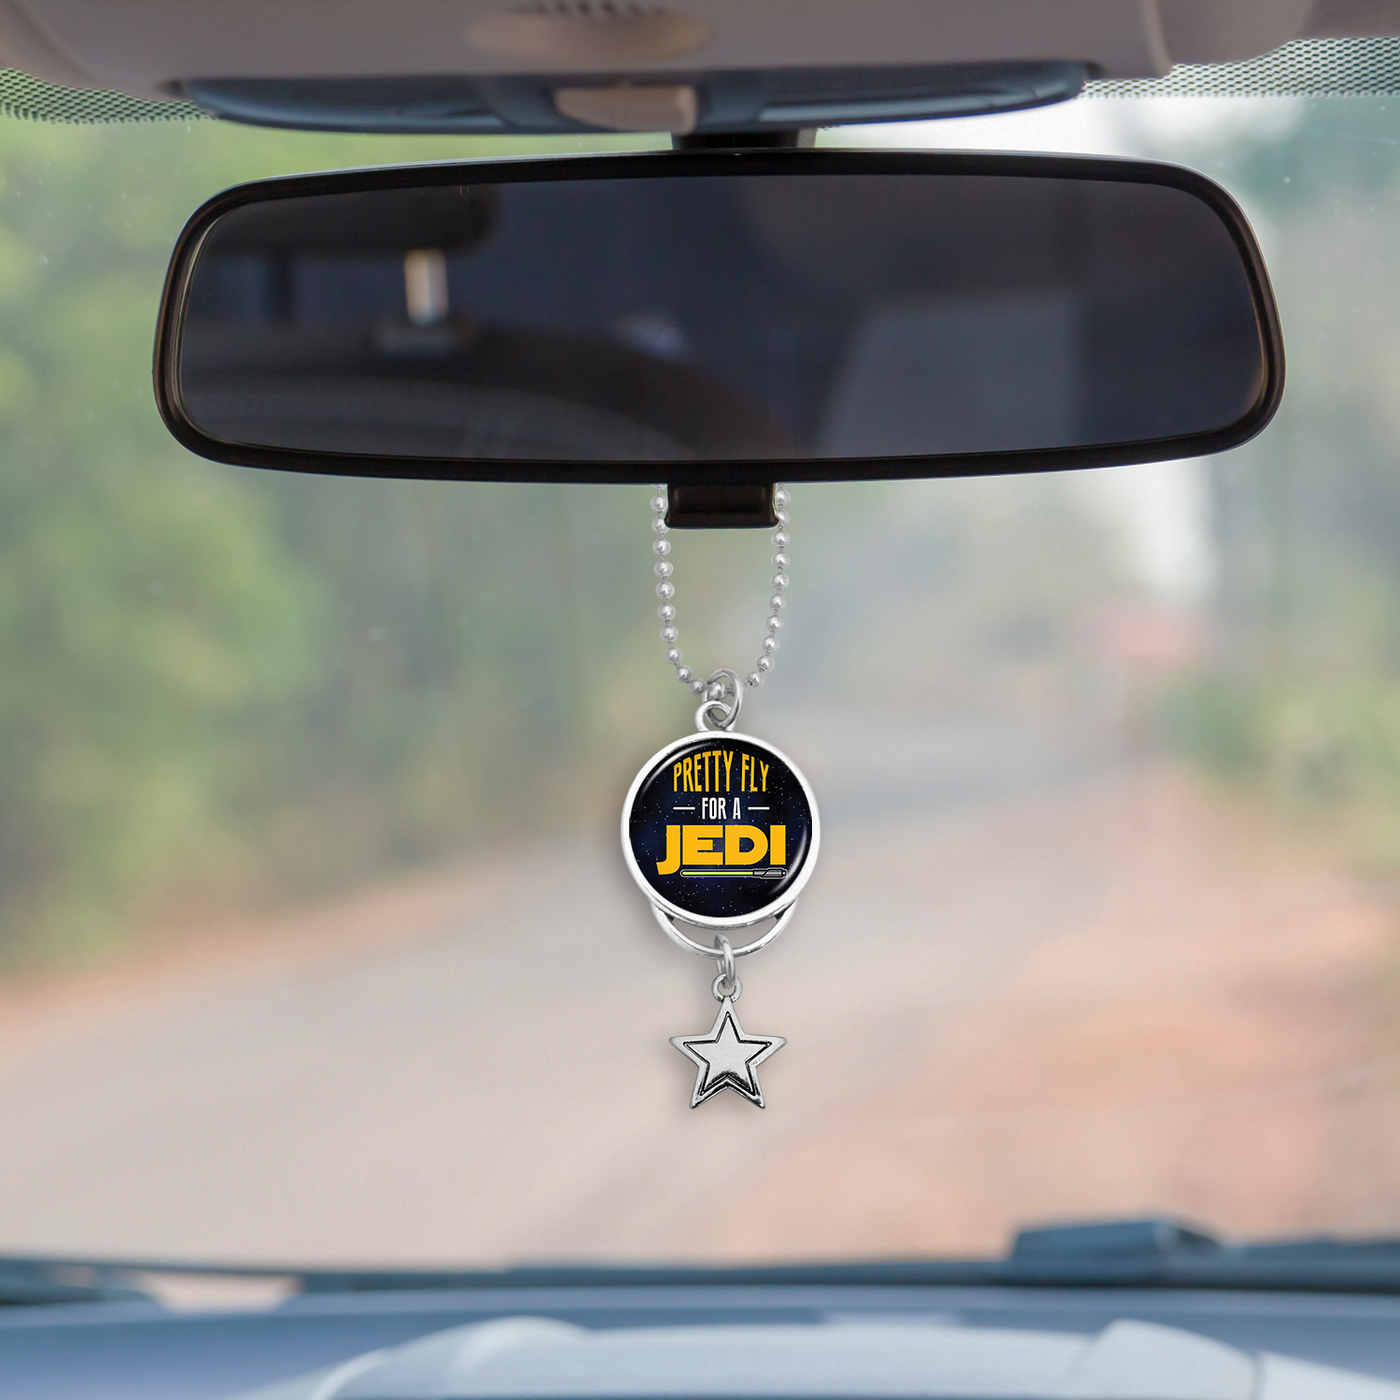 Pretty Fly For A Jedi Rearview Mirror Charm